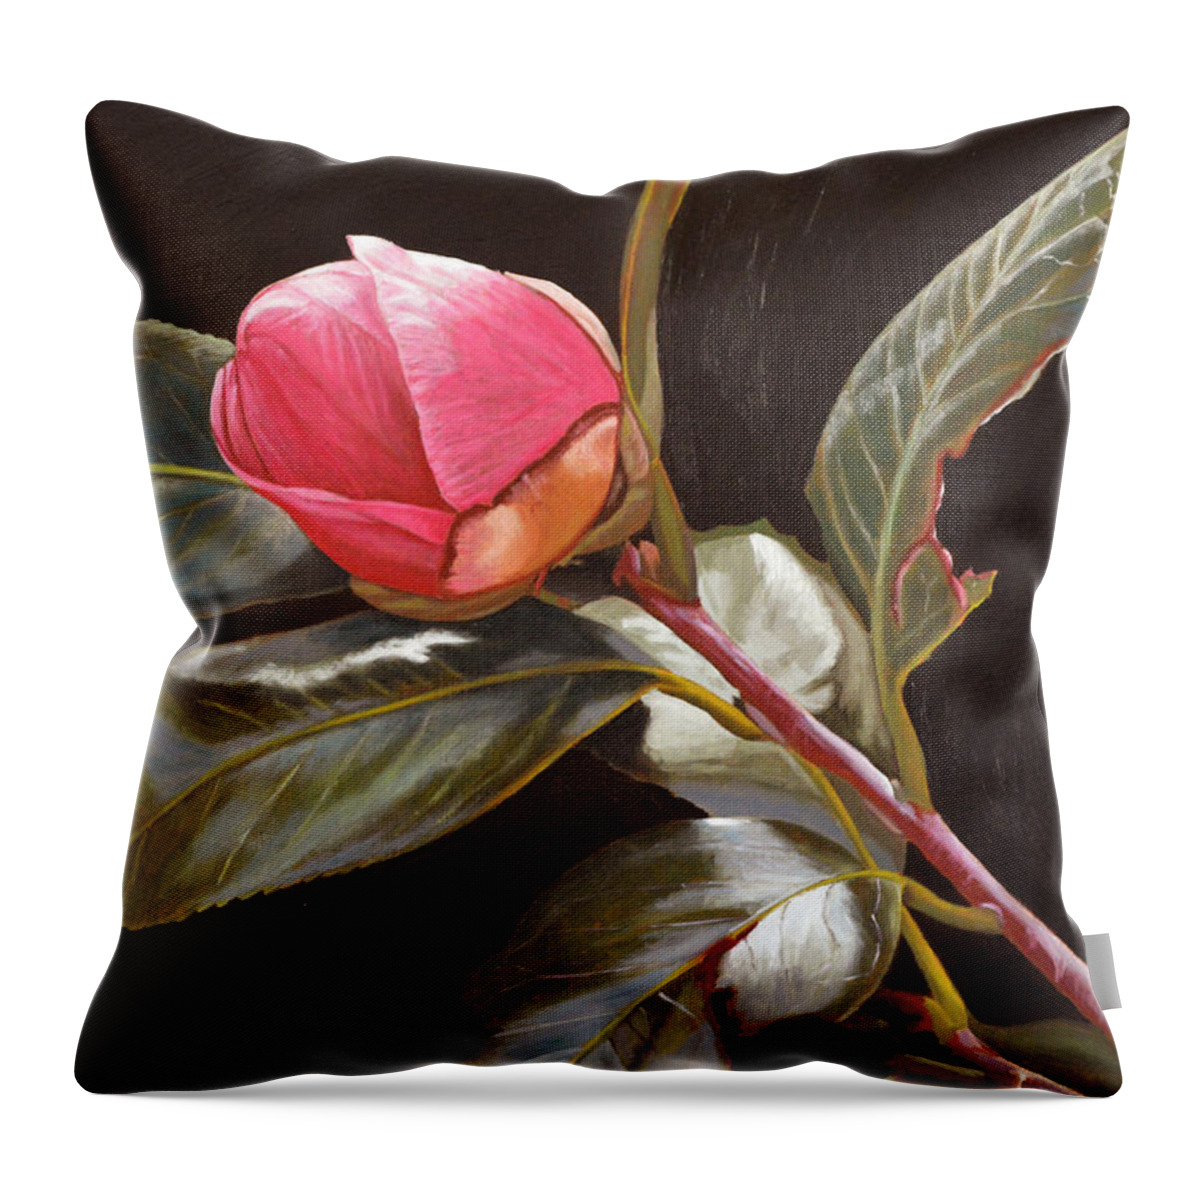 Rose Throw Pillow featuring the painting November Rose by Thu Nguyen